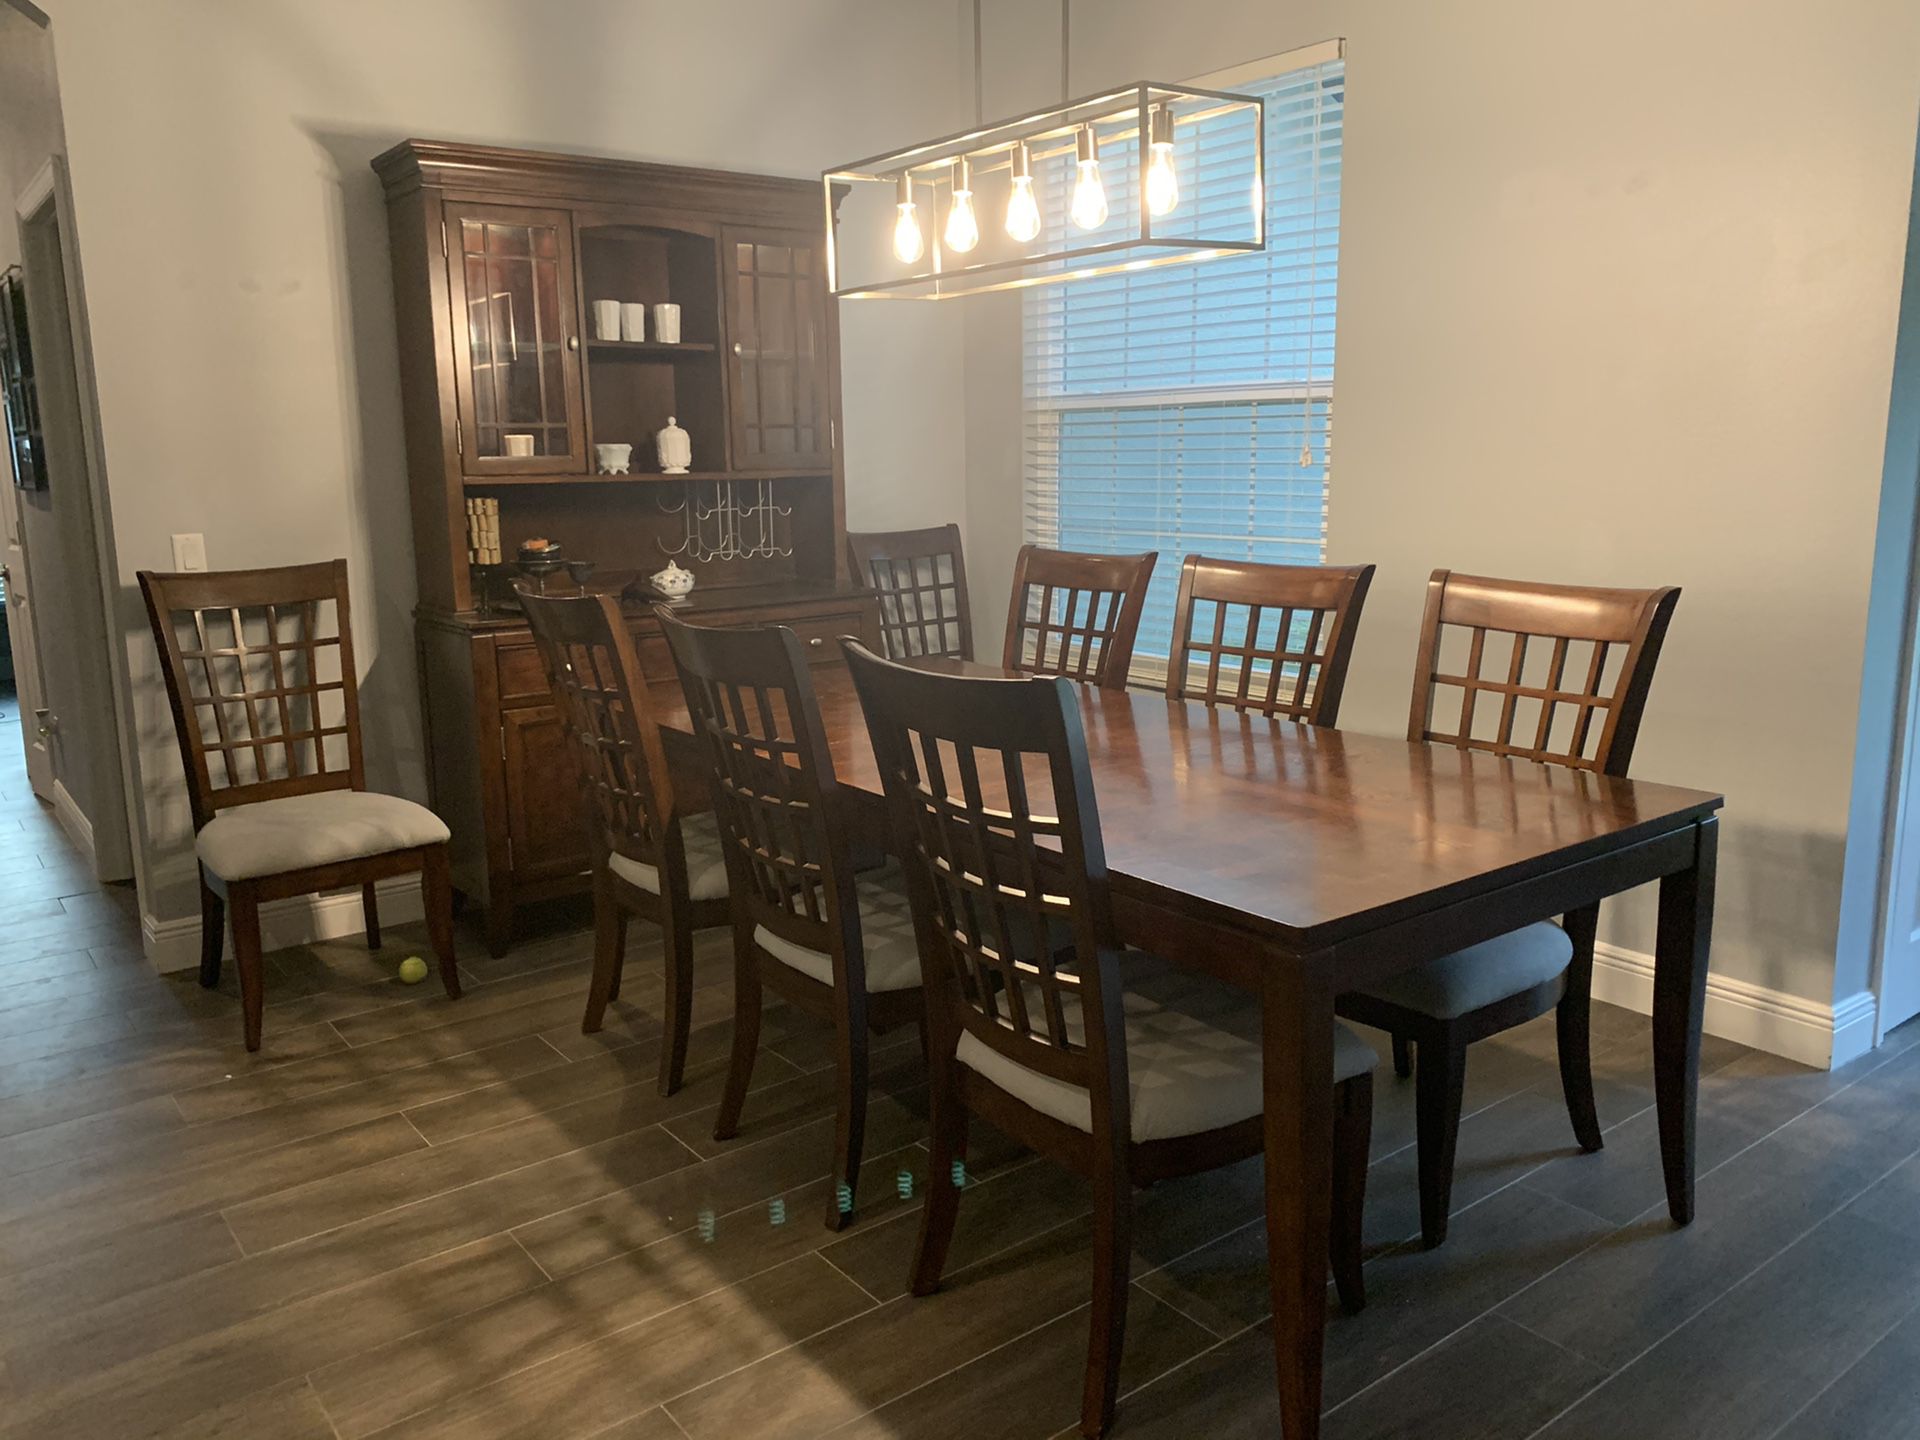 Havertys dining room set, 8 chairs and lighted cabinet